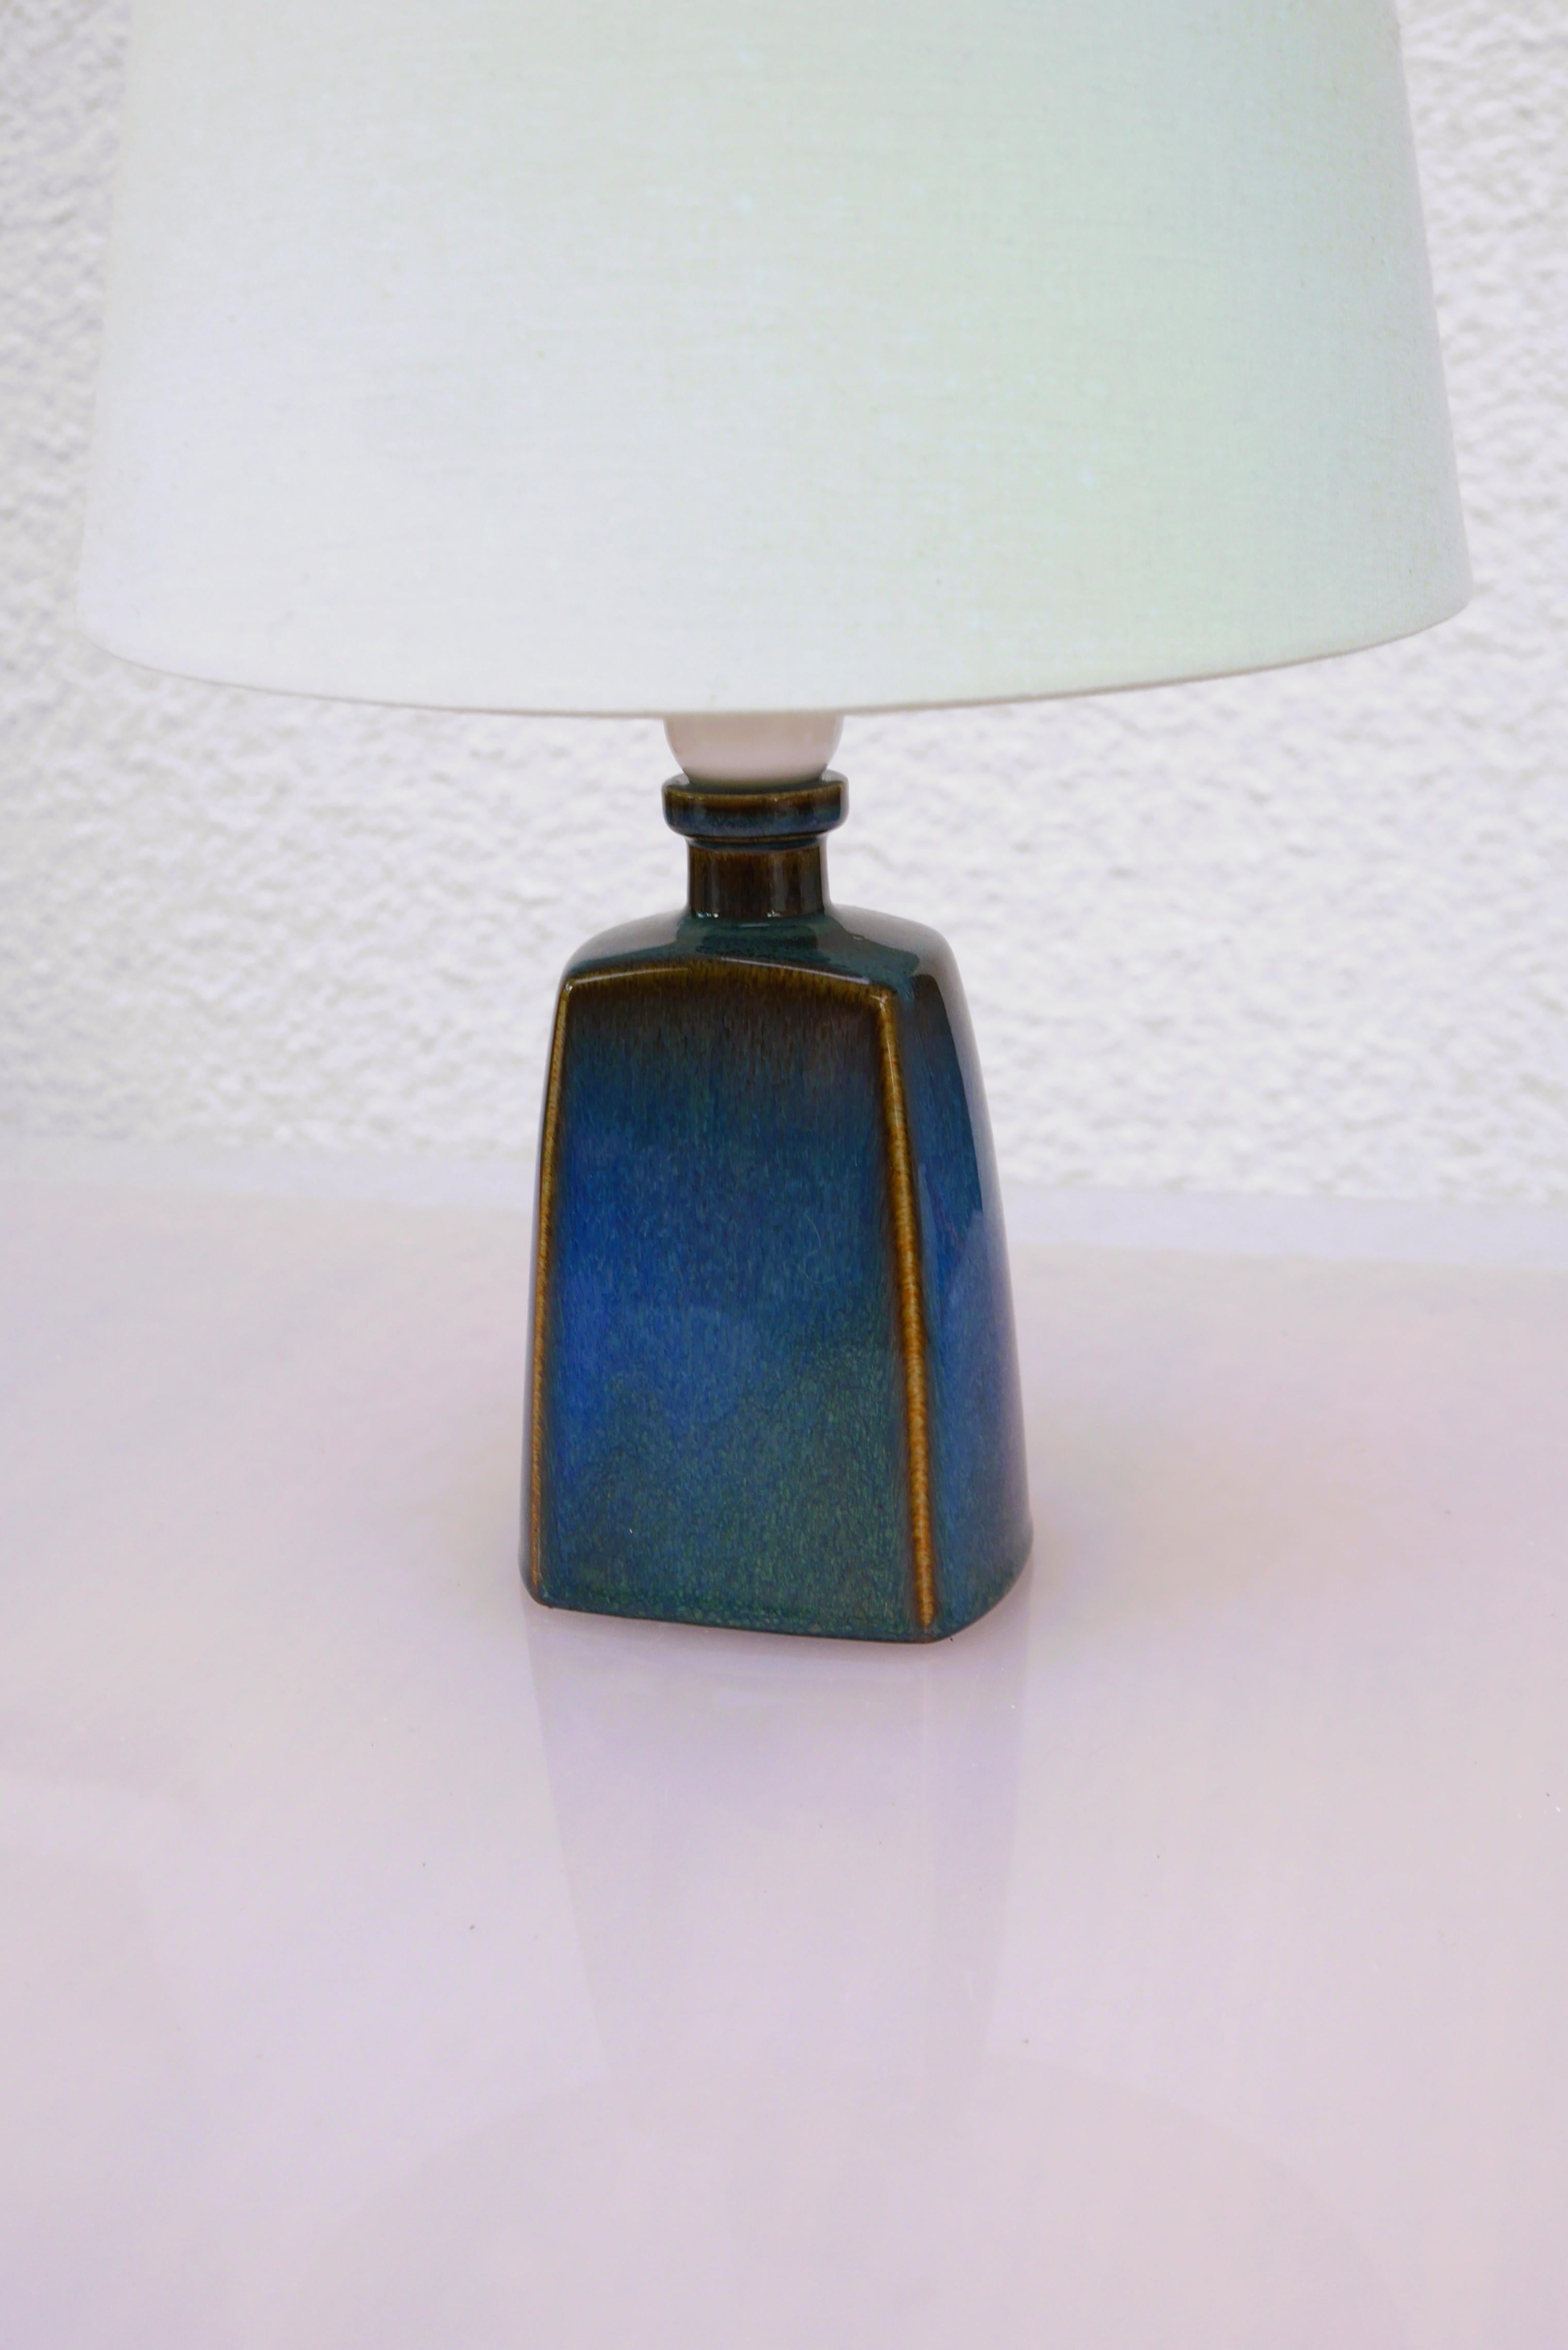 Mid-century modern pottery lamp base, known as 